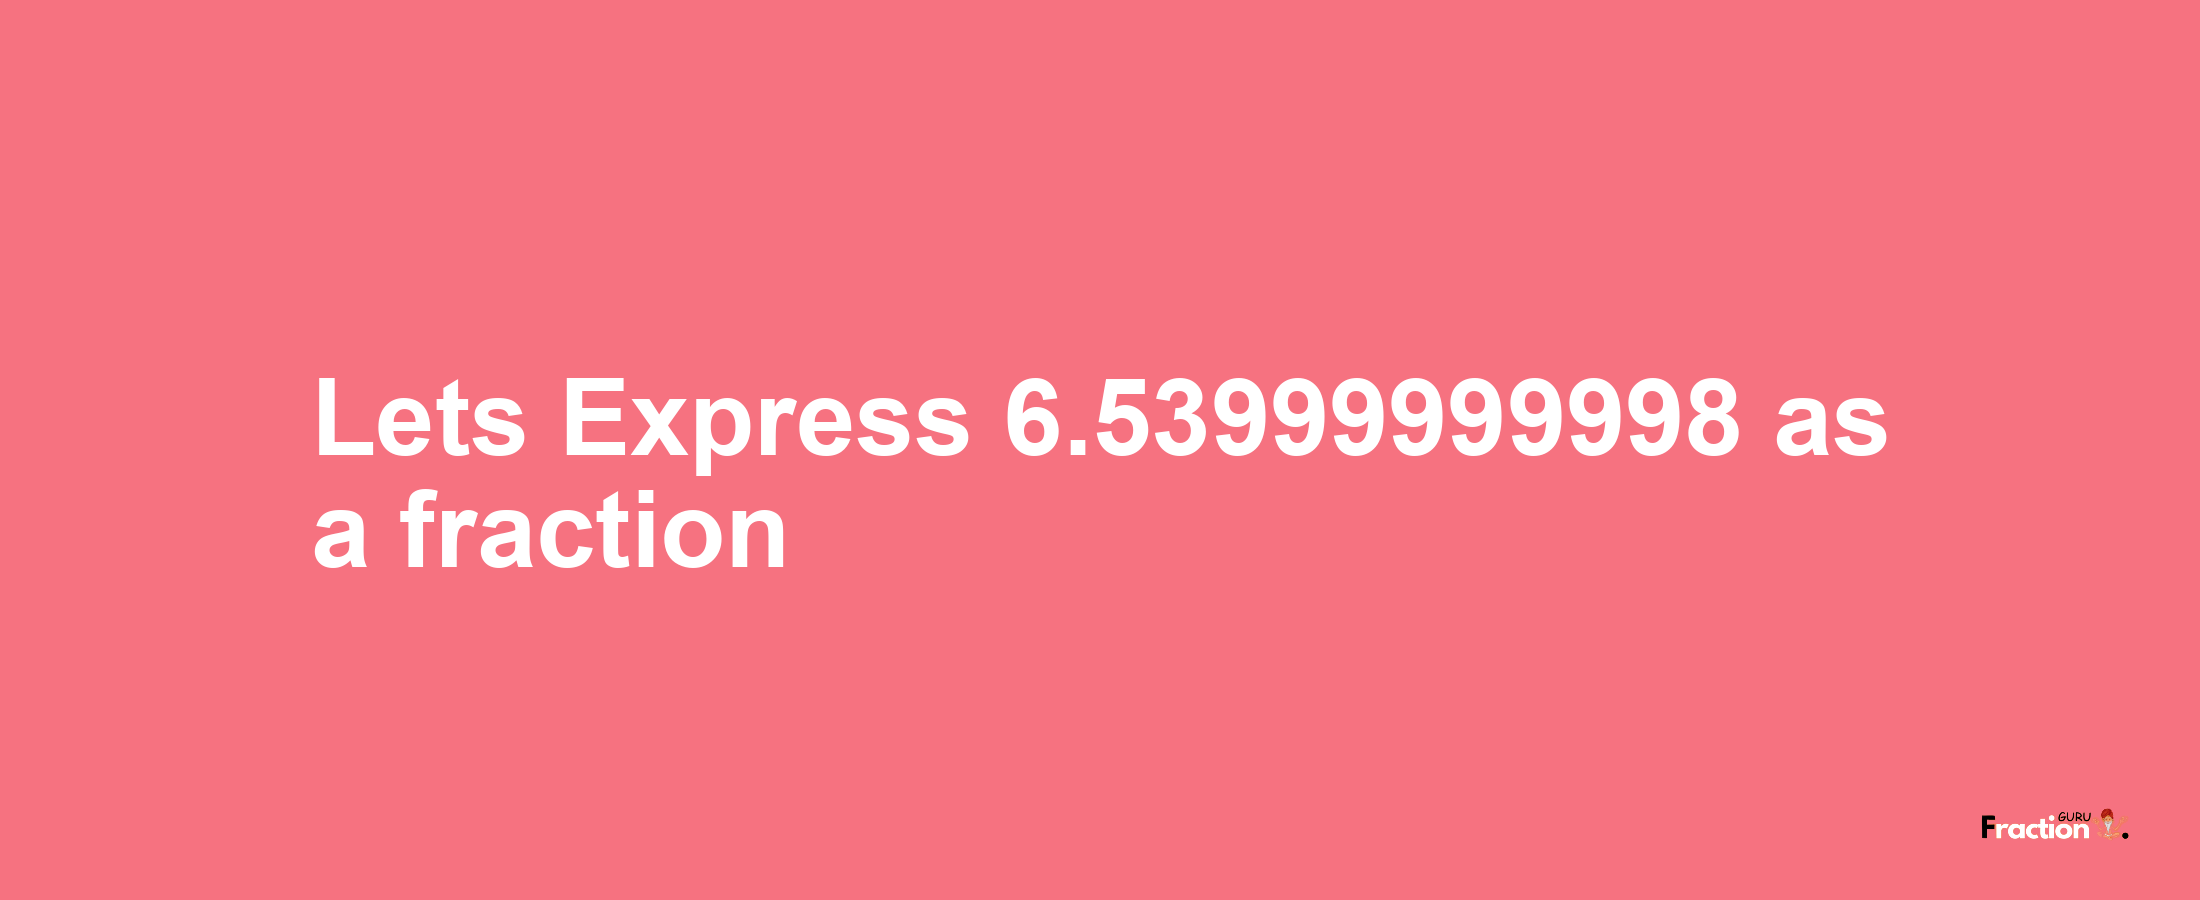 Lets Express 6.53999999998 as afraction